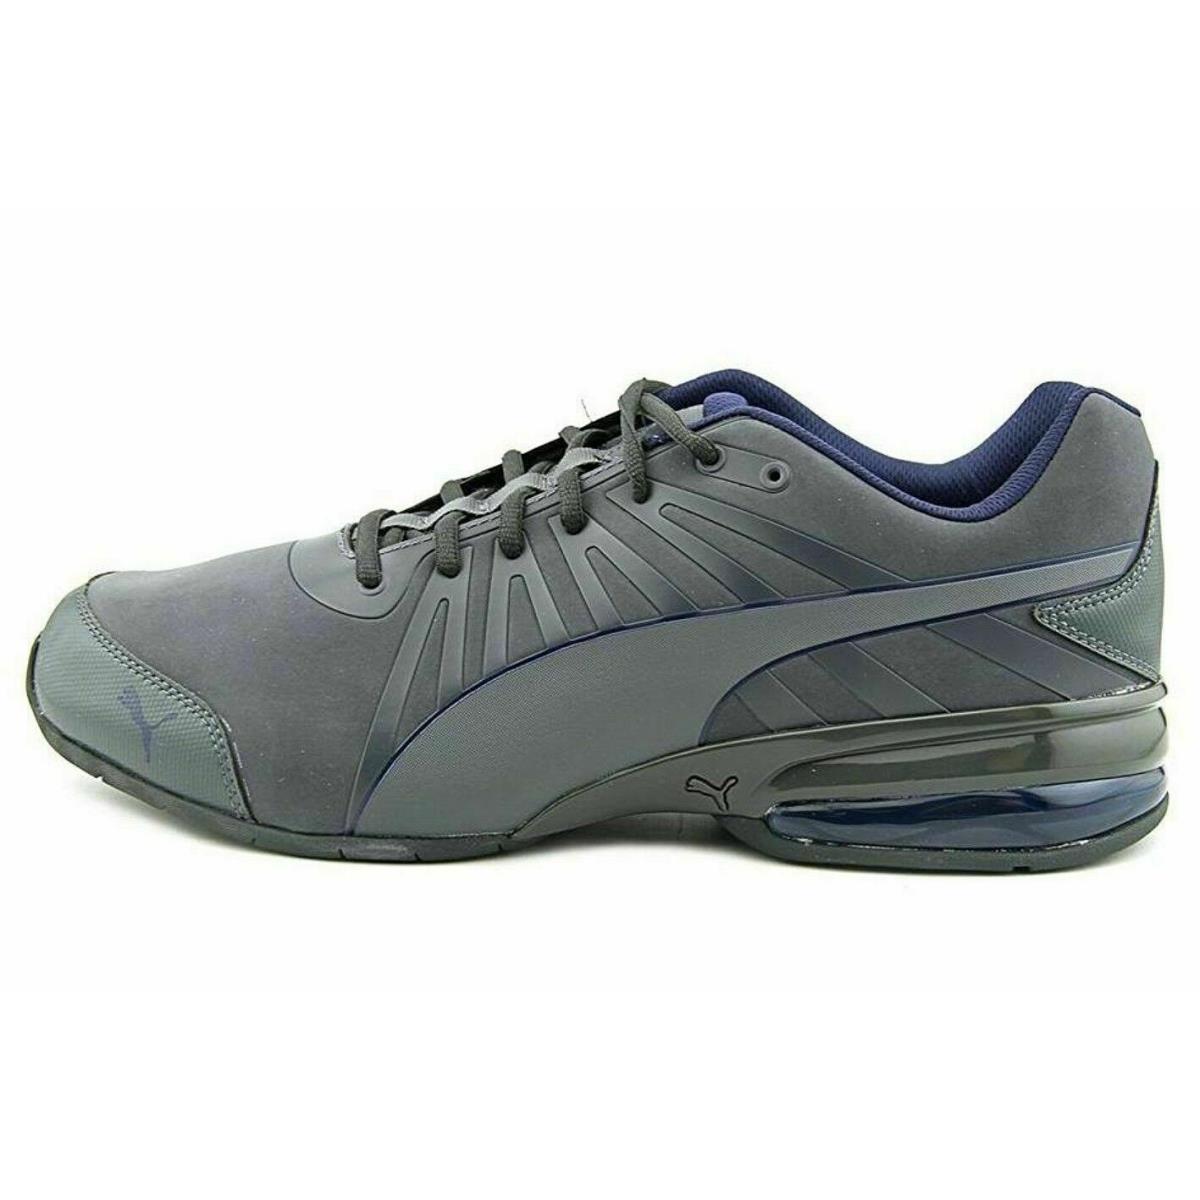 Puma Cell Kilter Cross Low Trainers Sports Sneakers Men Shoes Gray 